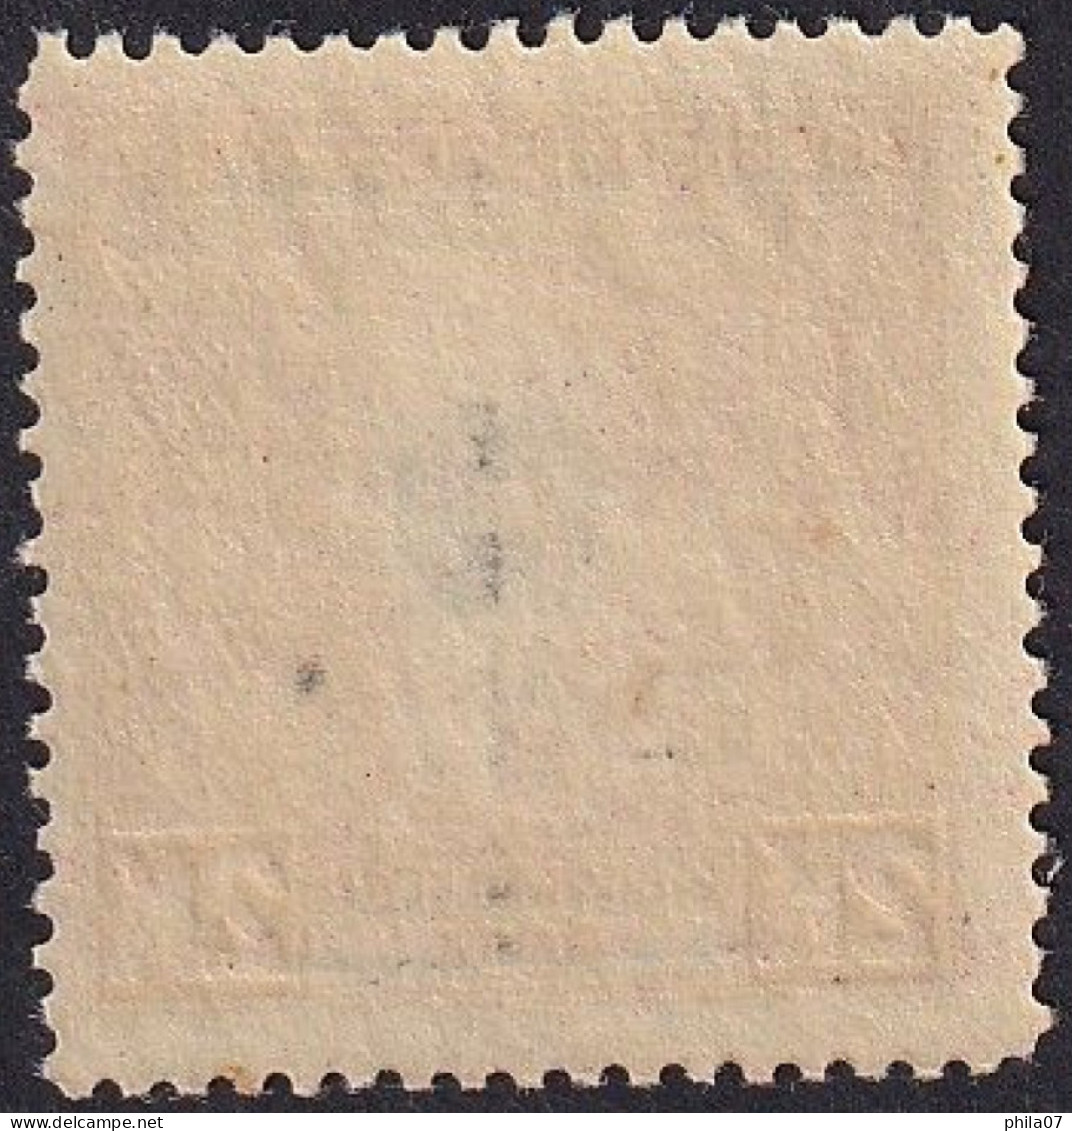 BOSNIA AND HERZEGOVINA - Trial Overprint From Series Mi.No. 33/50 On Stamp With Image Of Karlo / 2 Scan - Bosnie-Herzegovine